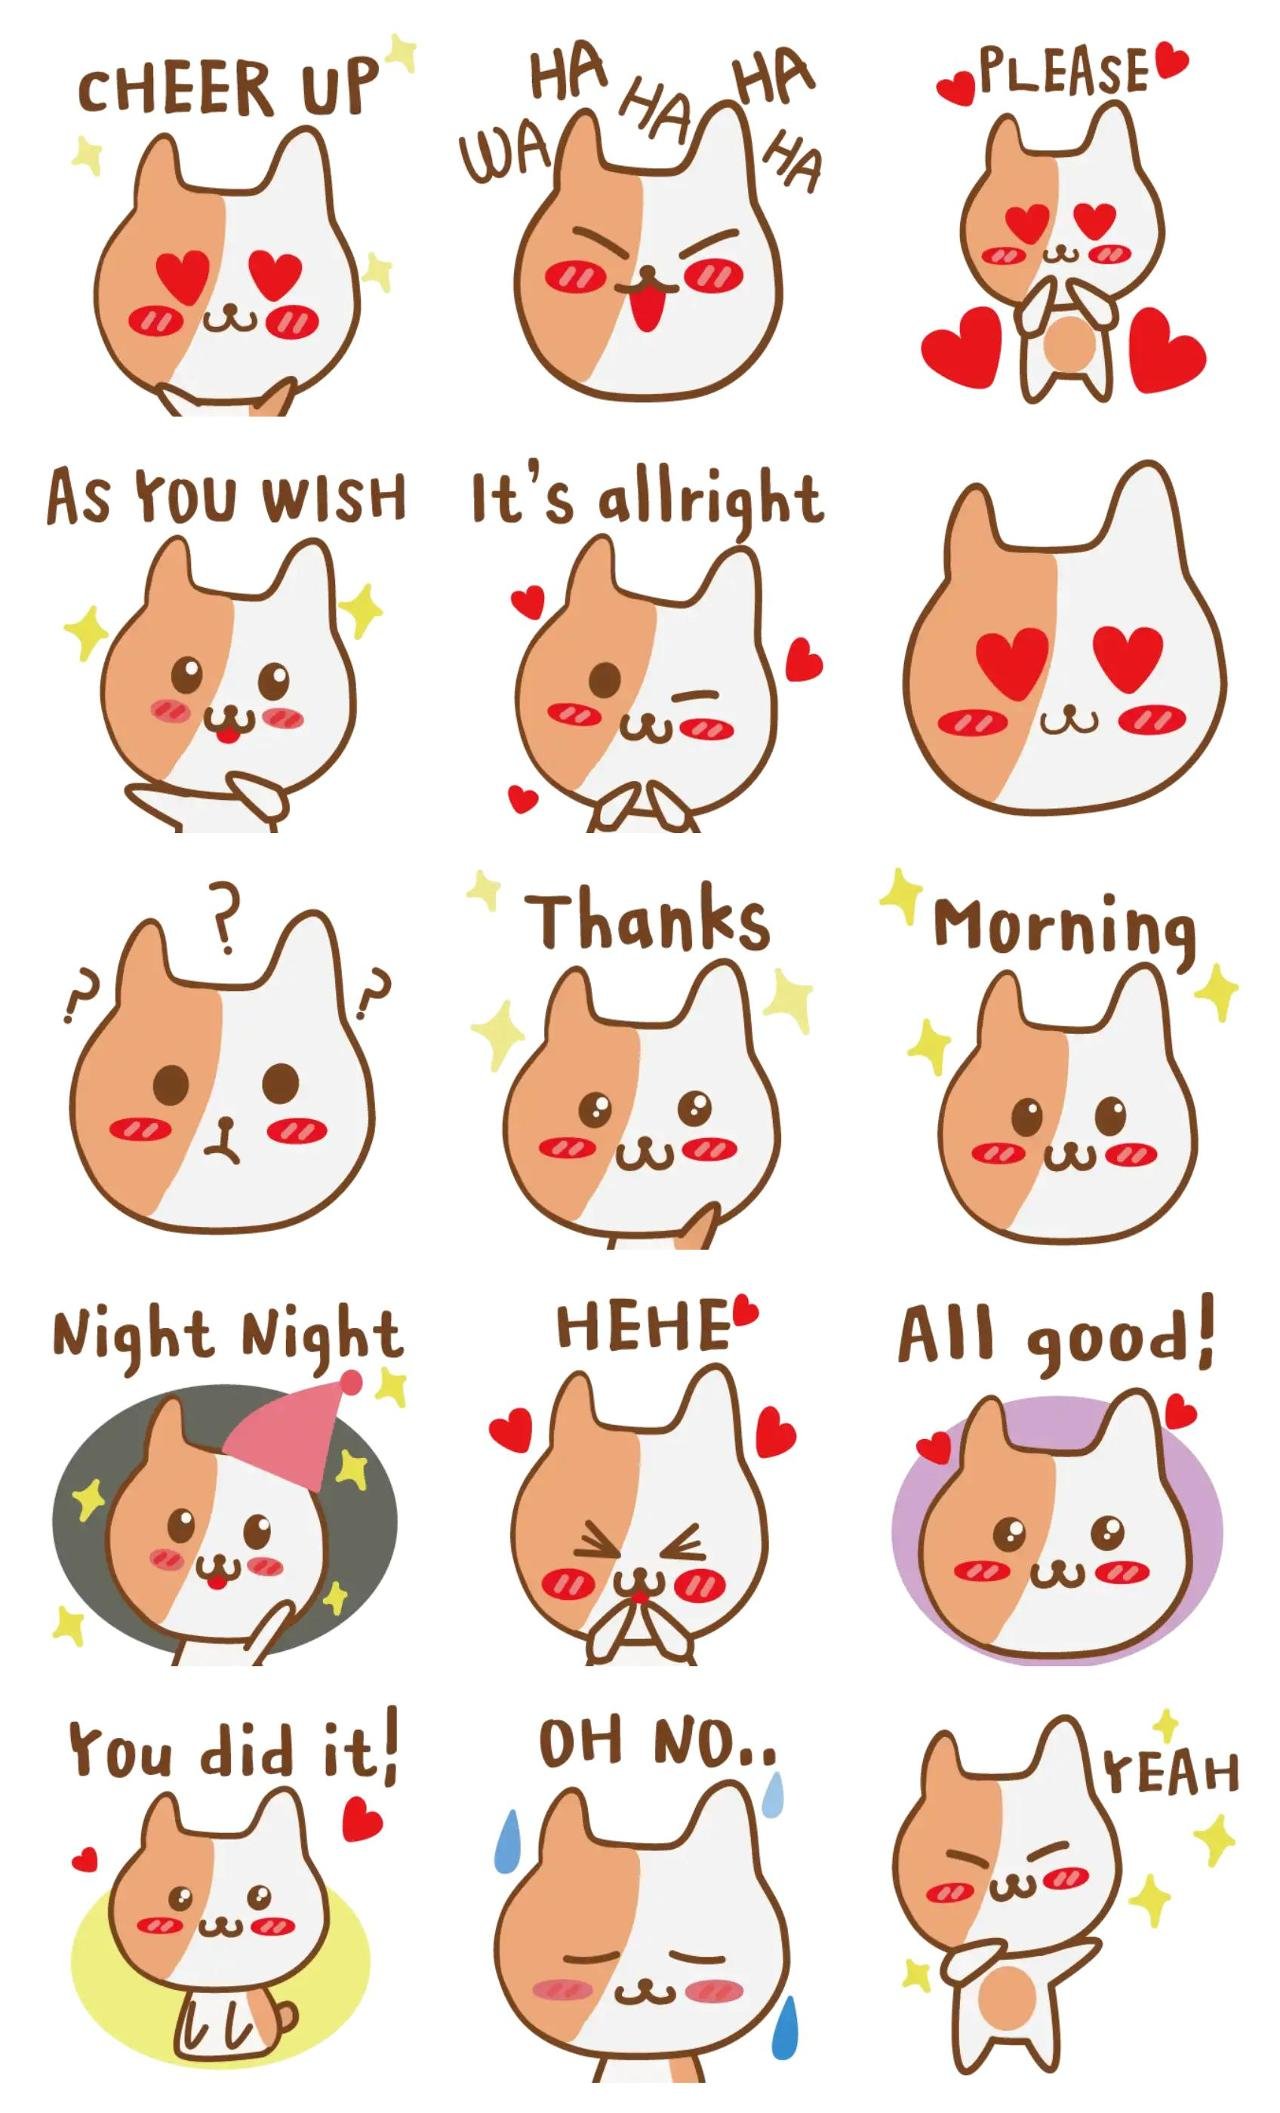 Cute Choco Animation/Cartoon,Animals sticker pack for Whatsapp, Telegram, Signal, and others chatting and message apps